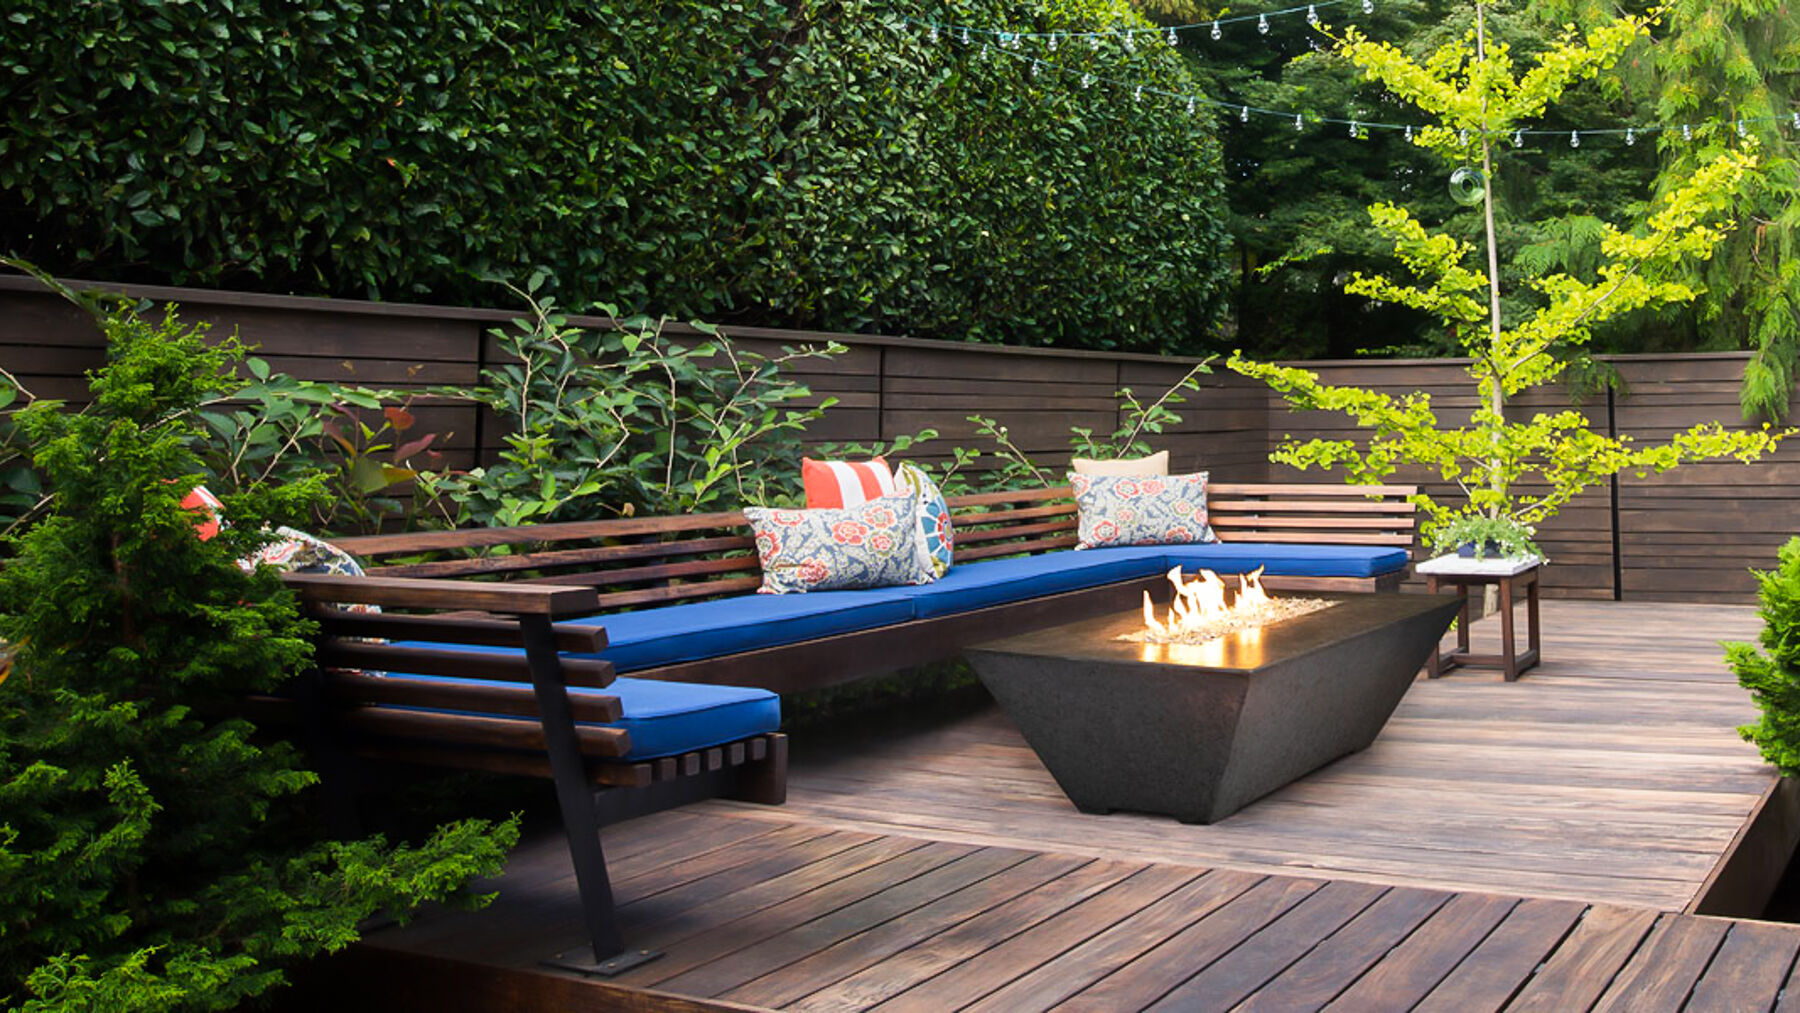 An outdoor deck surrounded by lush green foliage with a large, L-shaped blue couch and a black gas fire table.